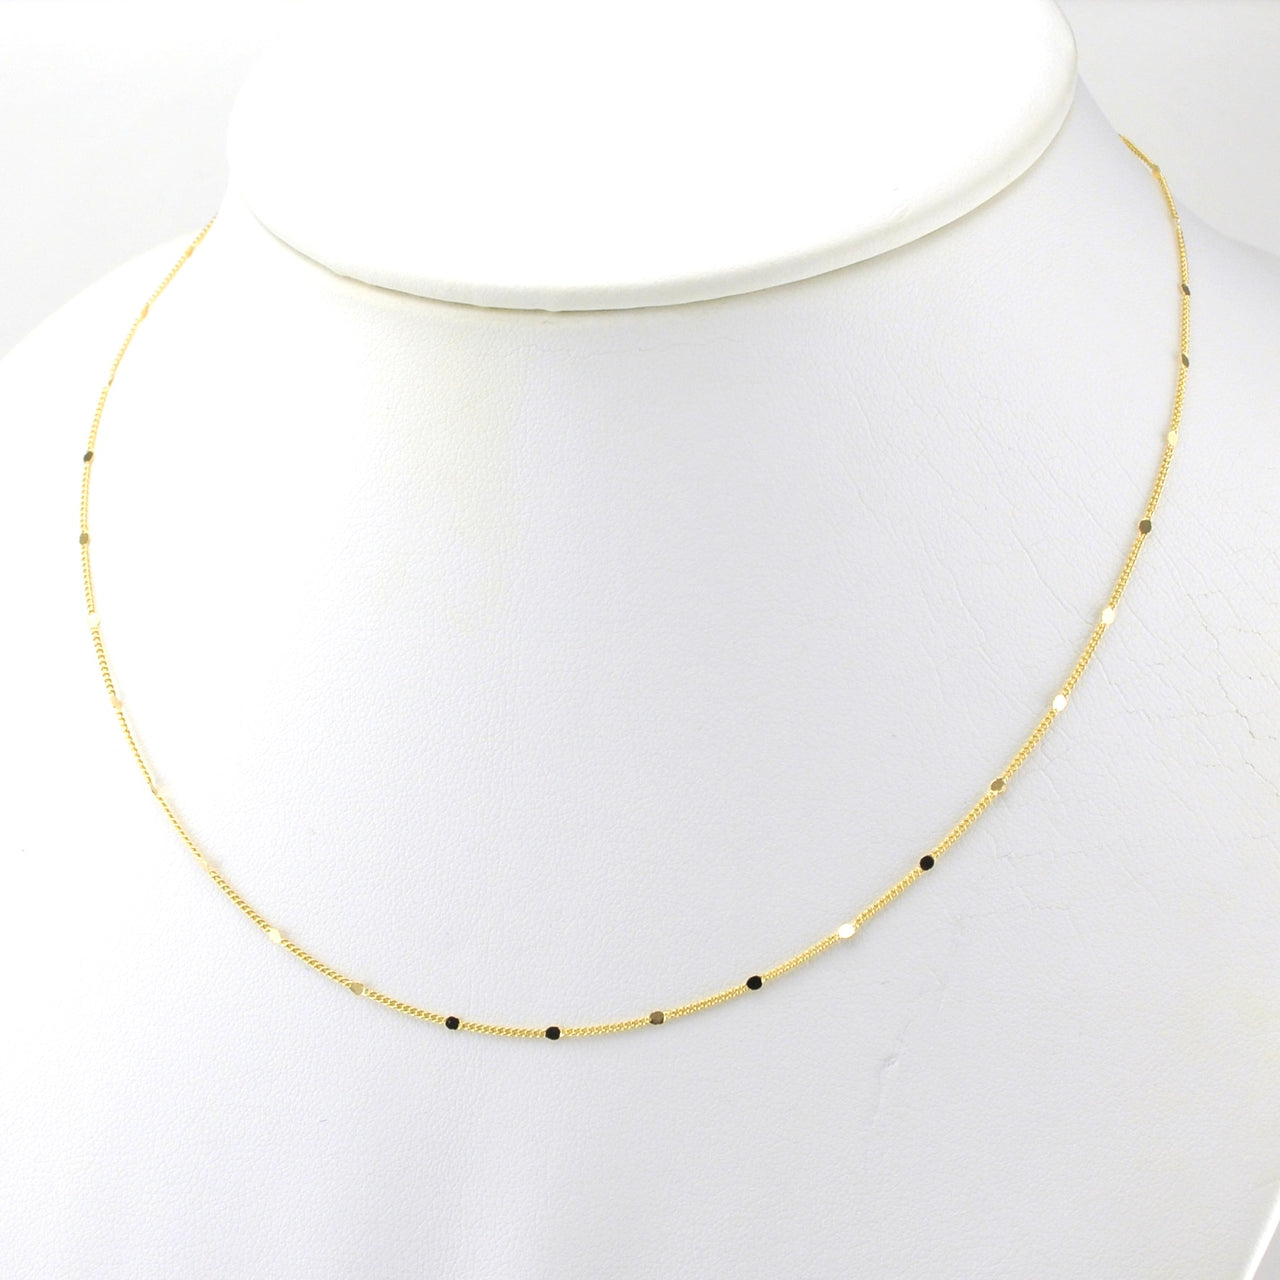 18k Gold Fill 16 Inch 1mm Curb Chain with Pressed Details and Extender